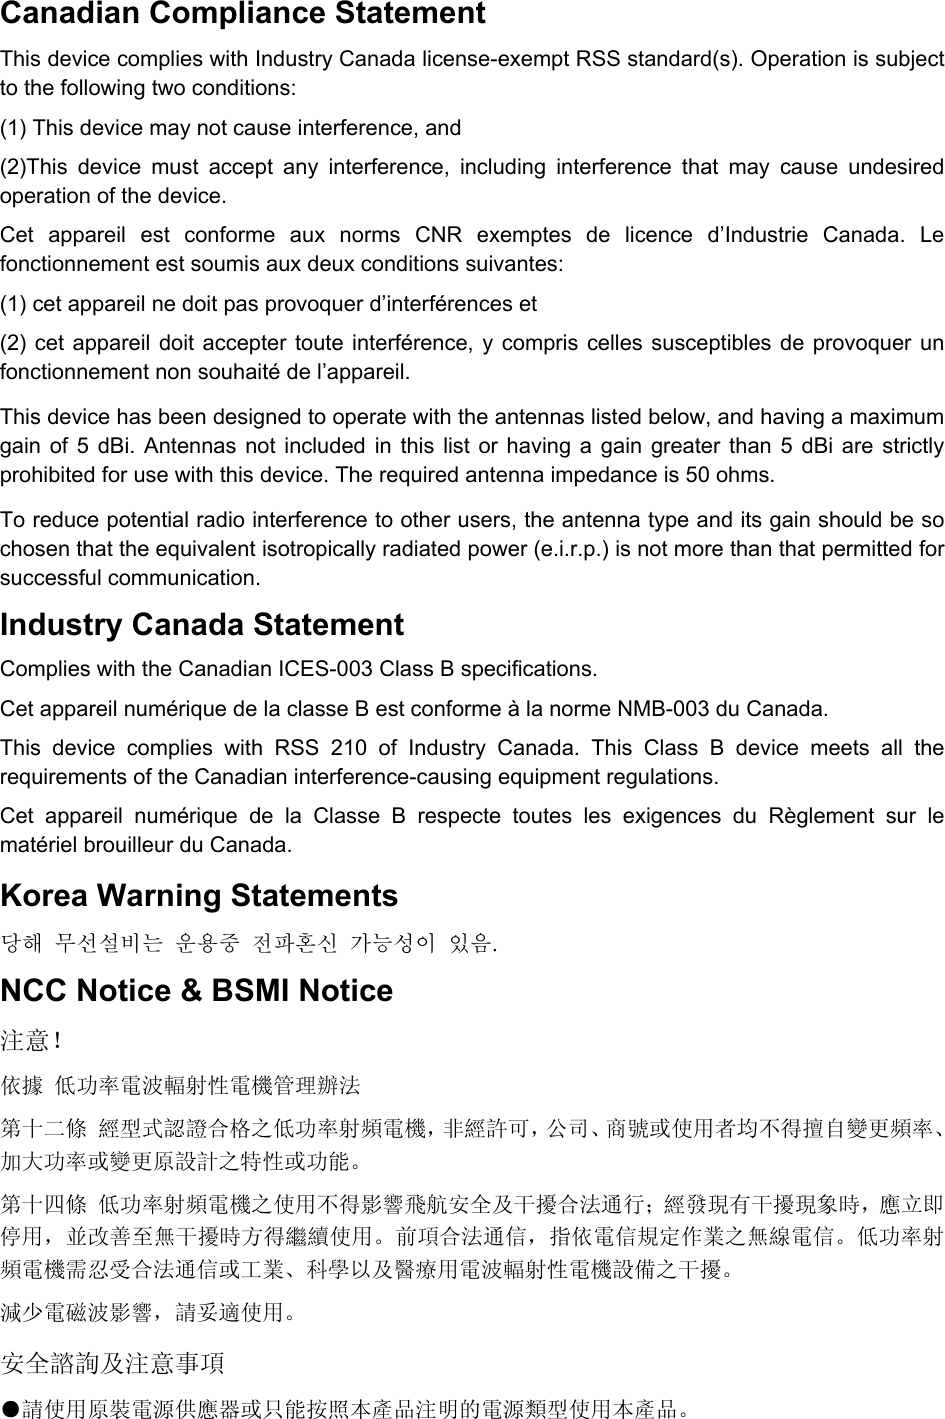 Canadian Compliance Statement This device complies with Industry Canada license-exempt RSS standard(s). Operation is subject to the following two conditions:   (1) This device may not cause interference, and   (2)This device must accept any interference, including interference that may cause undesired operation of the device. Cet appareil est conforme aux norms CNR exemptes de licence d’Industrie Canada. Le fonctionnement est soumis aux deux conditions suivantes:   (1) cet appareil ne doit pas provoquer d’interférences et   (2) cet appareil doit accepter toute interférence, y compris celles susceptibles de provoquer un fonctionnement non souhaité de l’appareil. This device has been designed to operate with the antennas listed below, and having a maximum gain of 5 dBi. Antennas not included in this list or having a gain greater than 5 dBi are strictly prohibited for use with this device. The required antenna impedance is 50 ohms.   To reduce potential radio interference to other users, the antenna type and its gain should be so chosen that the equivalent isotropically radiated power (e.i.r.p.) is not more than that permitted for successful communication. Industry Canada Statement Complies with the Canadian ICES-003 Class B specifications. Cet appareil numérique de la classe B est conforme à la norme NMB-003 du Canada.   This device complies with RSS 210 of Industry Canada. This Class B device meets all the requirements of the Canadian interference-causing equipment regulations. Cet appareil numérique de la Classe B respecte toutes les exigences du Règlement sur le matériel brouilleur du Canada. Korea Warning Statements 당해 무선설비는 운용중 전파혼신 가능성이 있음. NCC Notice &amp; BSMI Notice 注意！  依據 低功率電波輻射性電機管理辦法 第十二條 經型式認證合格之低功率射頻電機，非經許可，公司、商號或使用者均不得擅自變更頻率、加大功率或變更原設計之特性或功能。 第十四條 低功率射頻電機之使用不得影響飛航安全及干擾合法通行；經發現有干擾現象時，應立即停用，並改善至無干擾時方得繼續使用。前項合法通信，指依電信規定作業之無線電信。低功率射頻電機需忍受合法通信或工業、科學以及醫療用電波輻射性電機設備之干擾。 減少電磁波影響，請妥適使用。 安全諮詢及注意事項 ●請使用原裝電源供應器或只能按照本產品注明的電源類型使用本產品。 